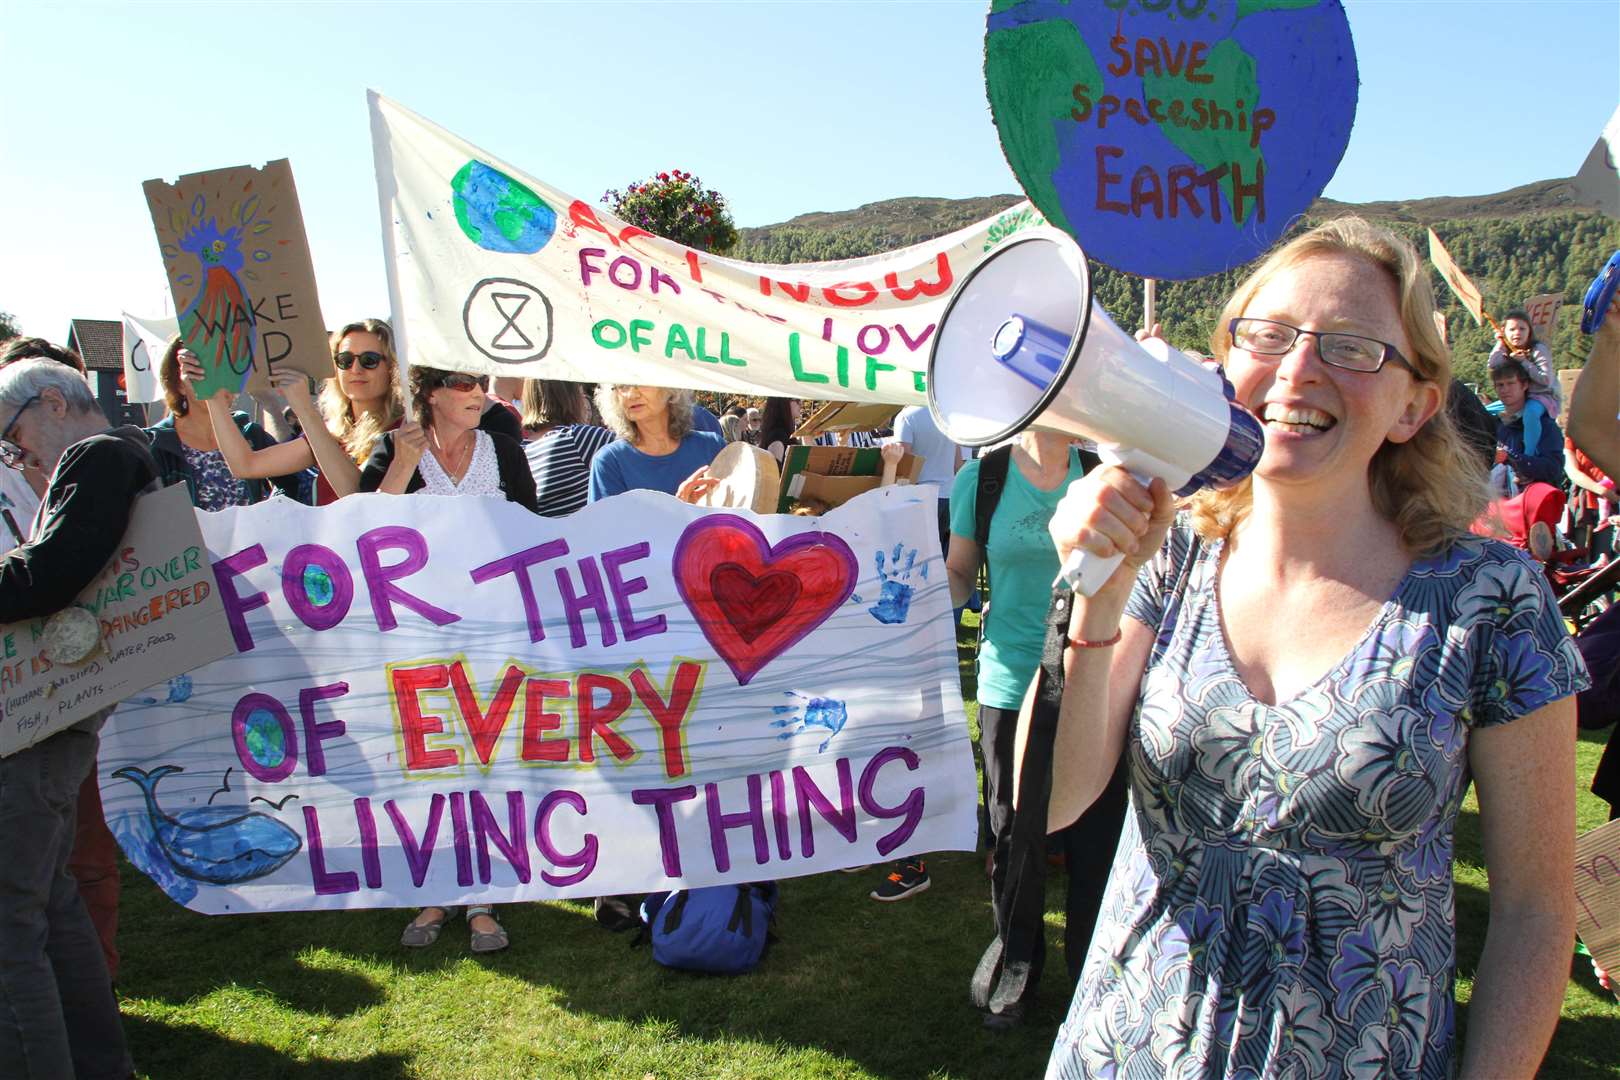 Climate change campaigners recently got their message over loud and clear in Aviemore as part of a global protest.